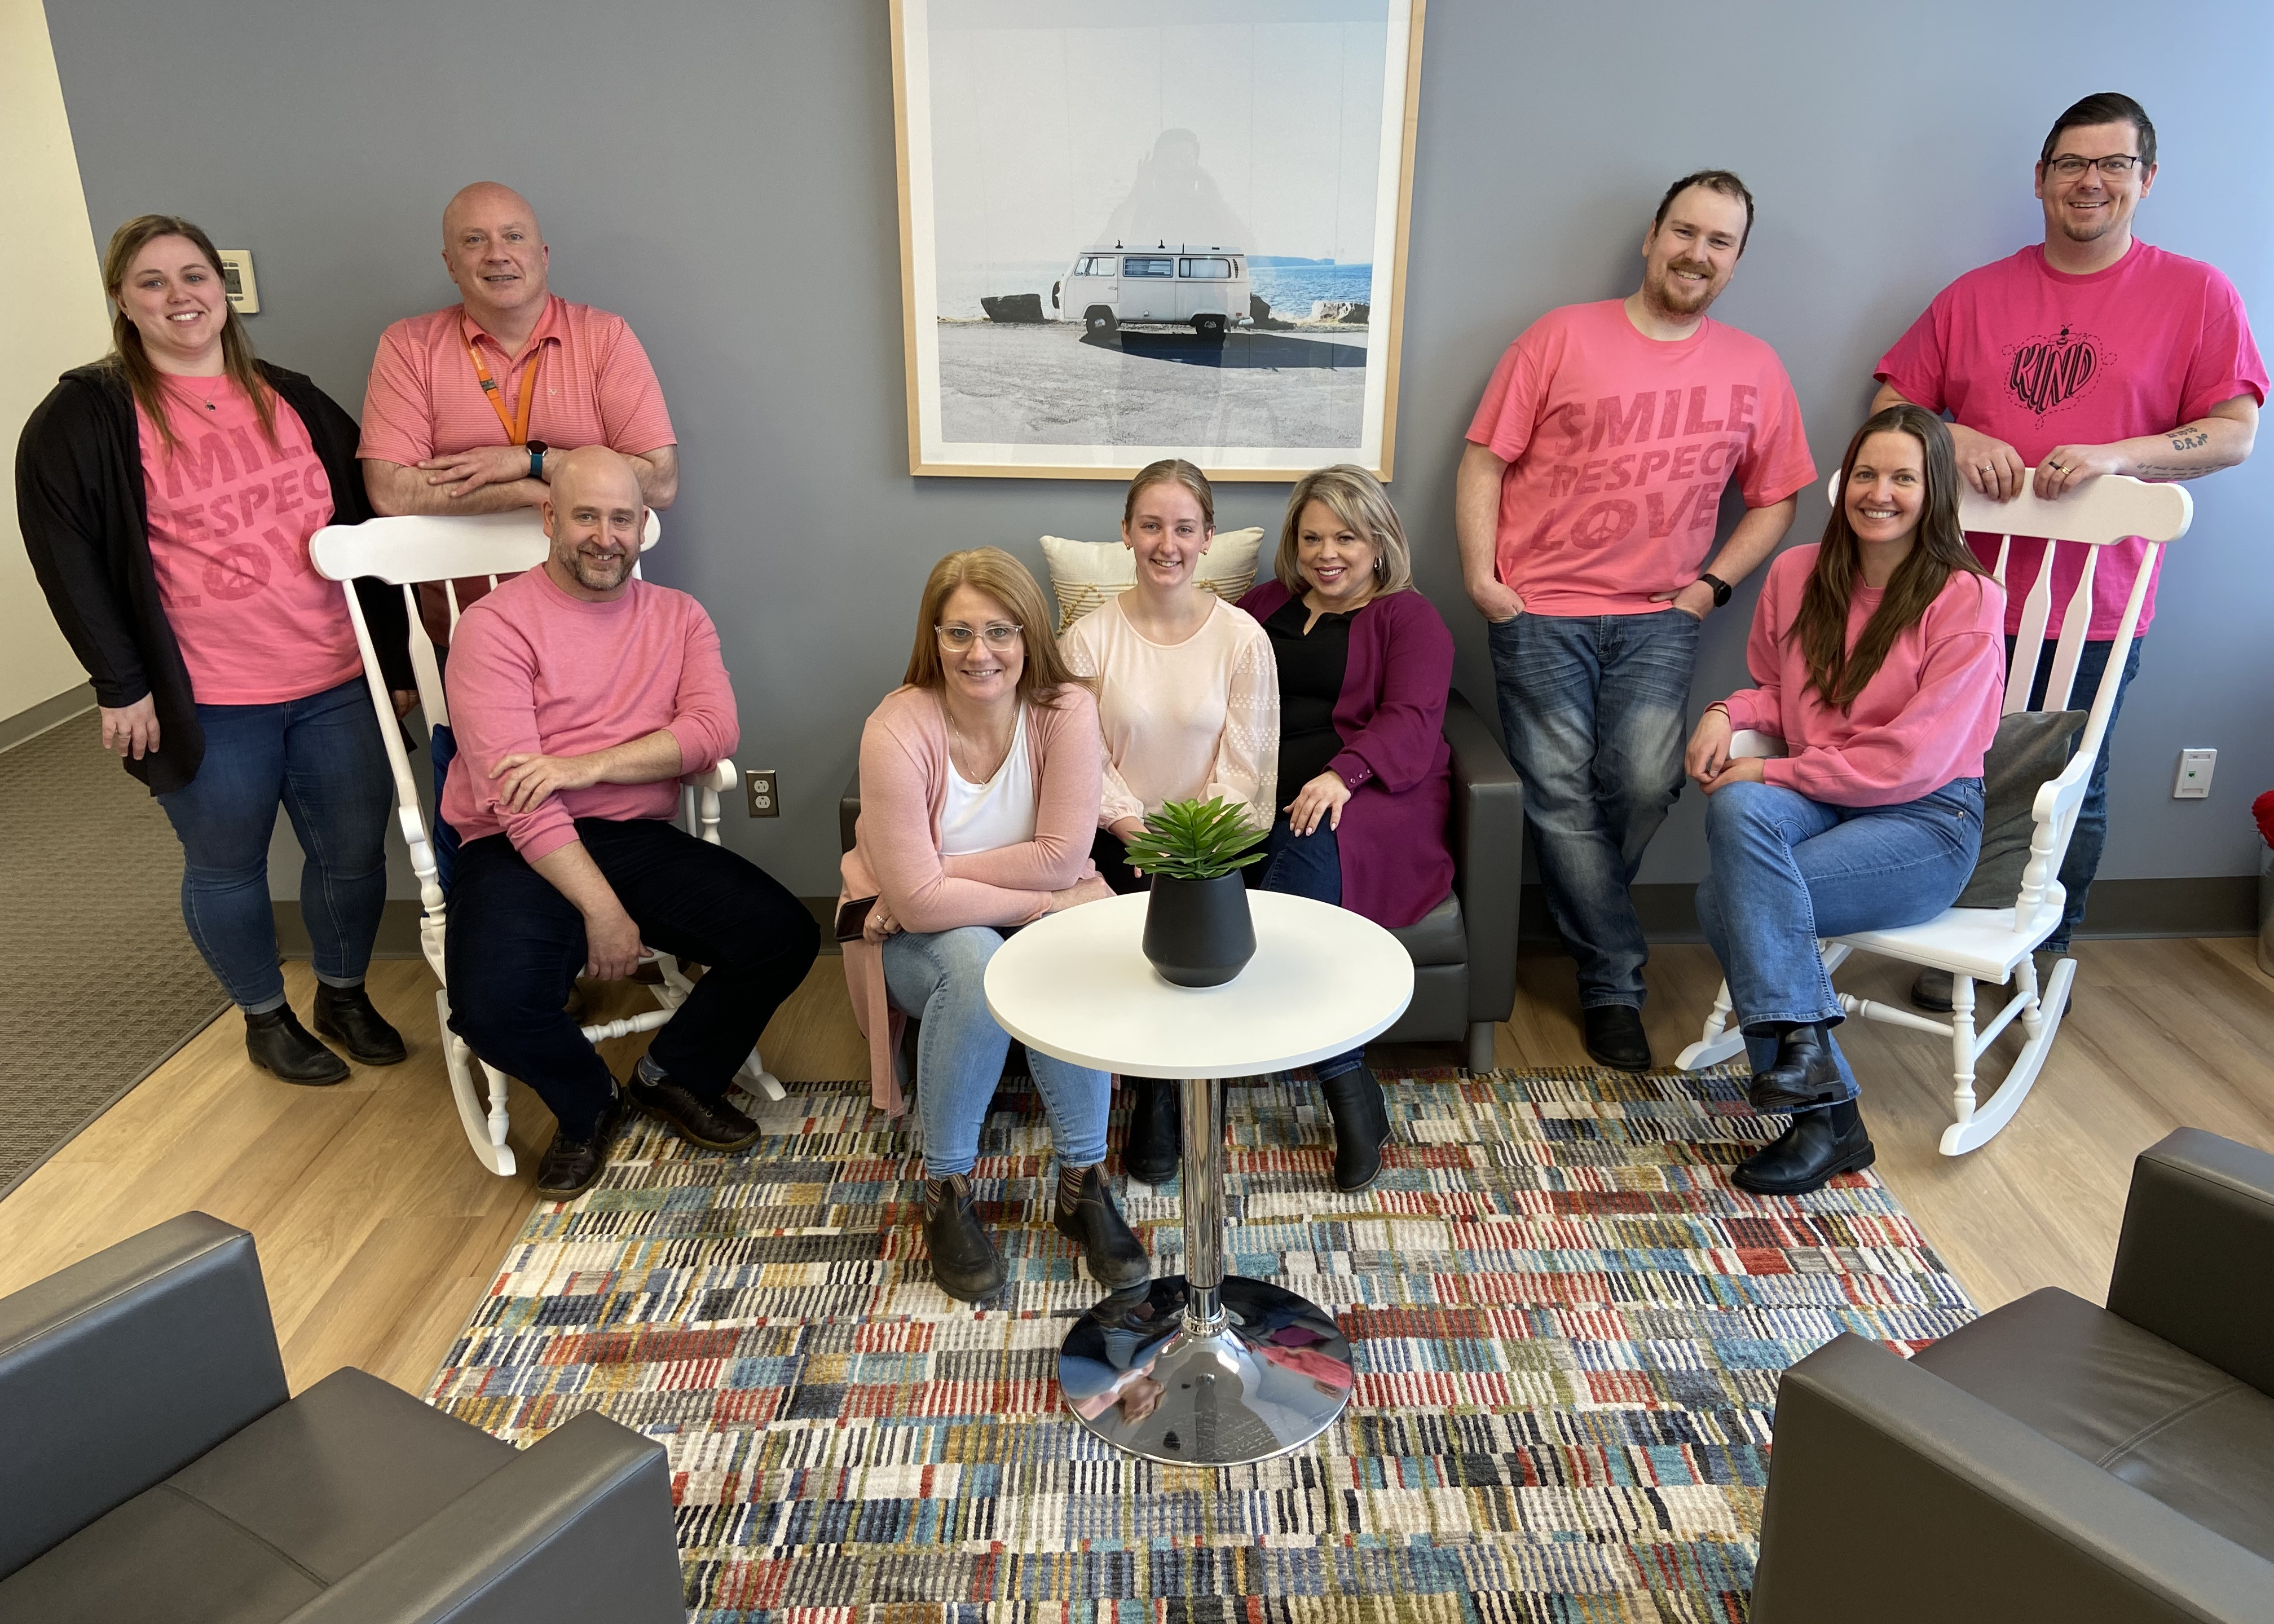 Our team sits together smiling for the camera in pink shirts.